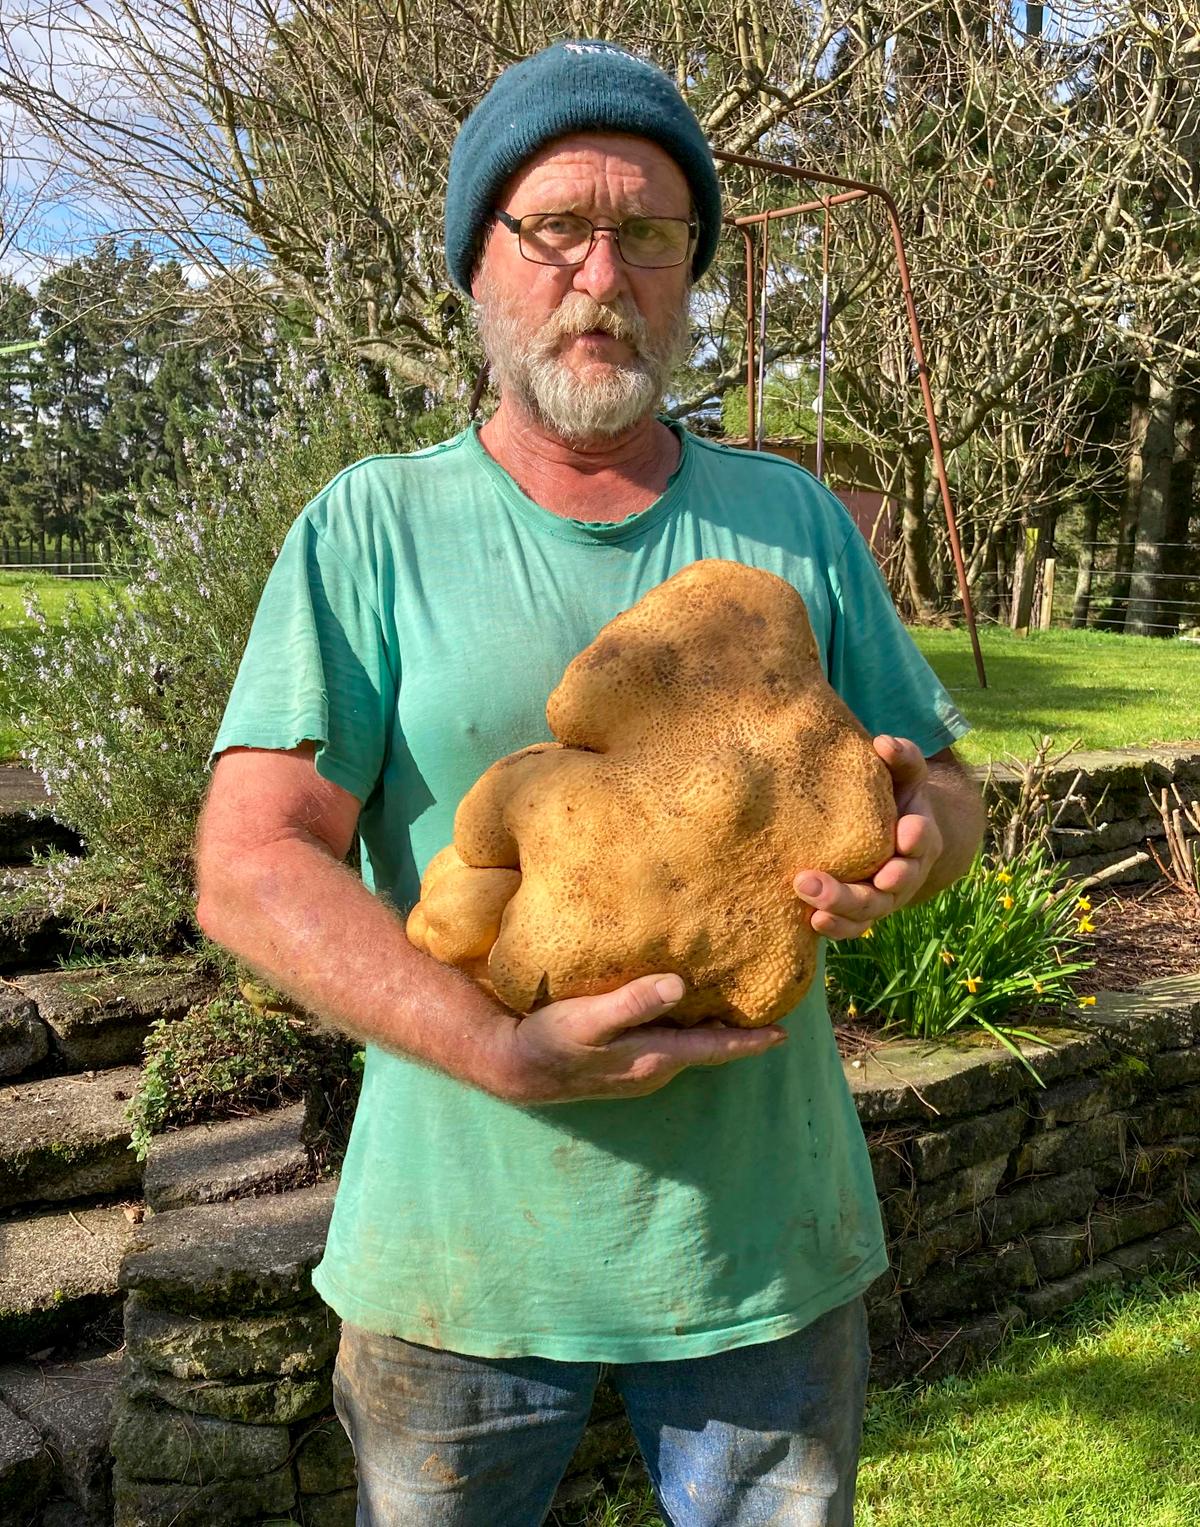 Colin Craig-Brown holds the large potato dug from his garden at his home near Hamilton, New Zealand, Aug. 30. (Donna Craig-Brown via AP)